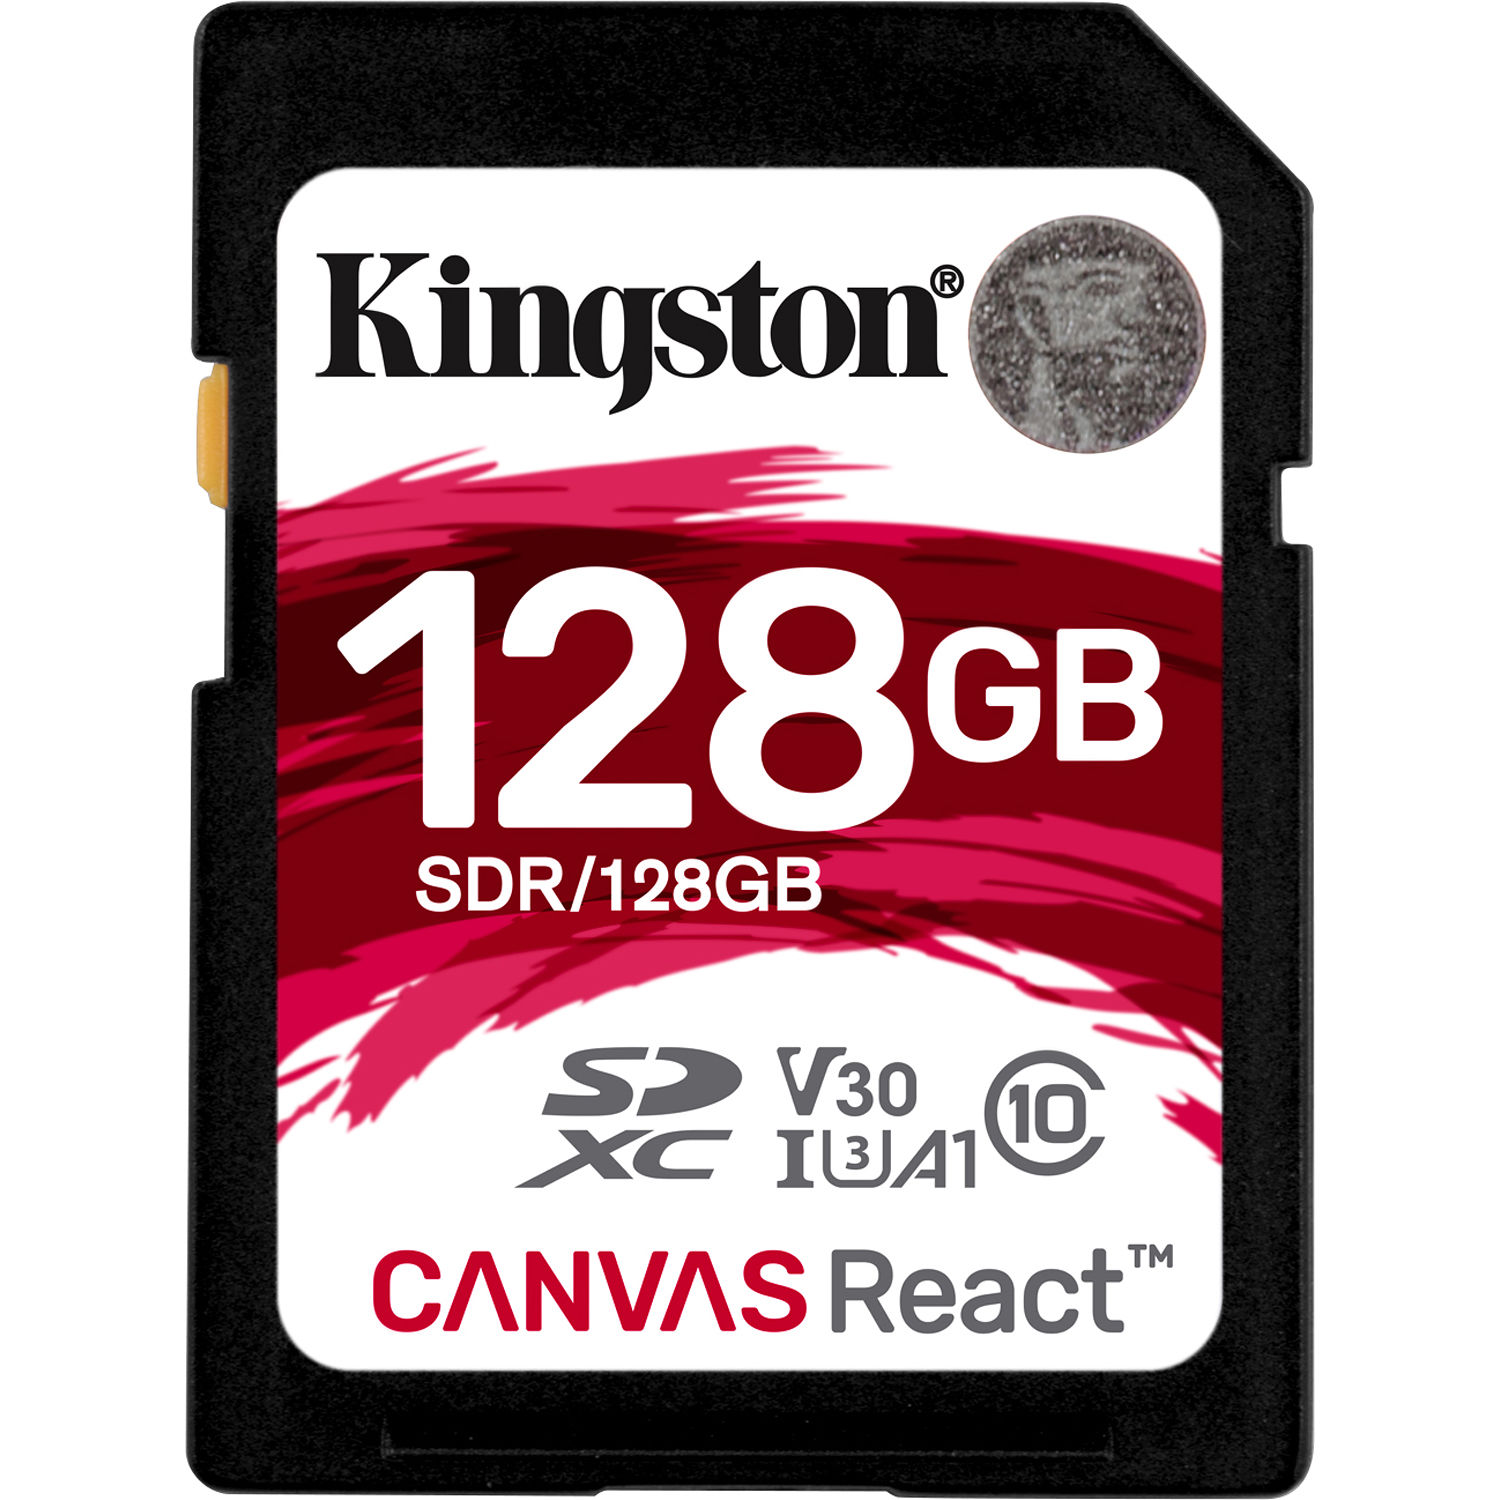 Kingston 128G SDR/128GB Canvas React SD 100MB/s read and 70MB/s write